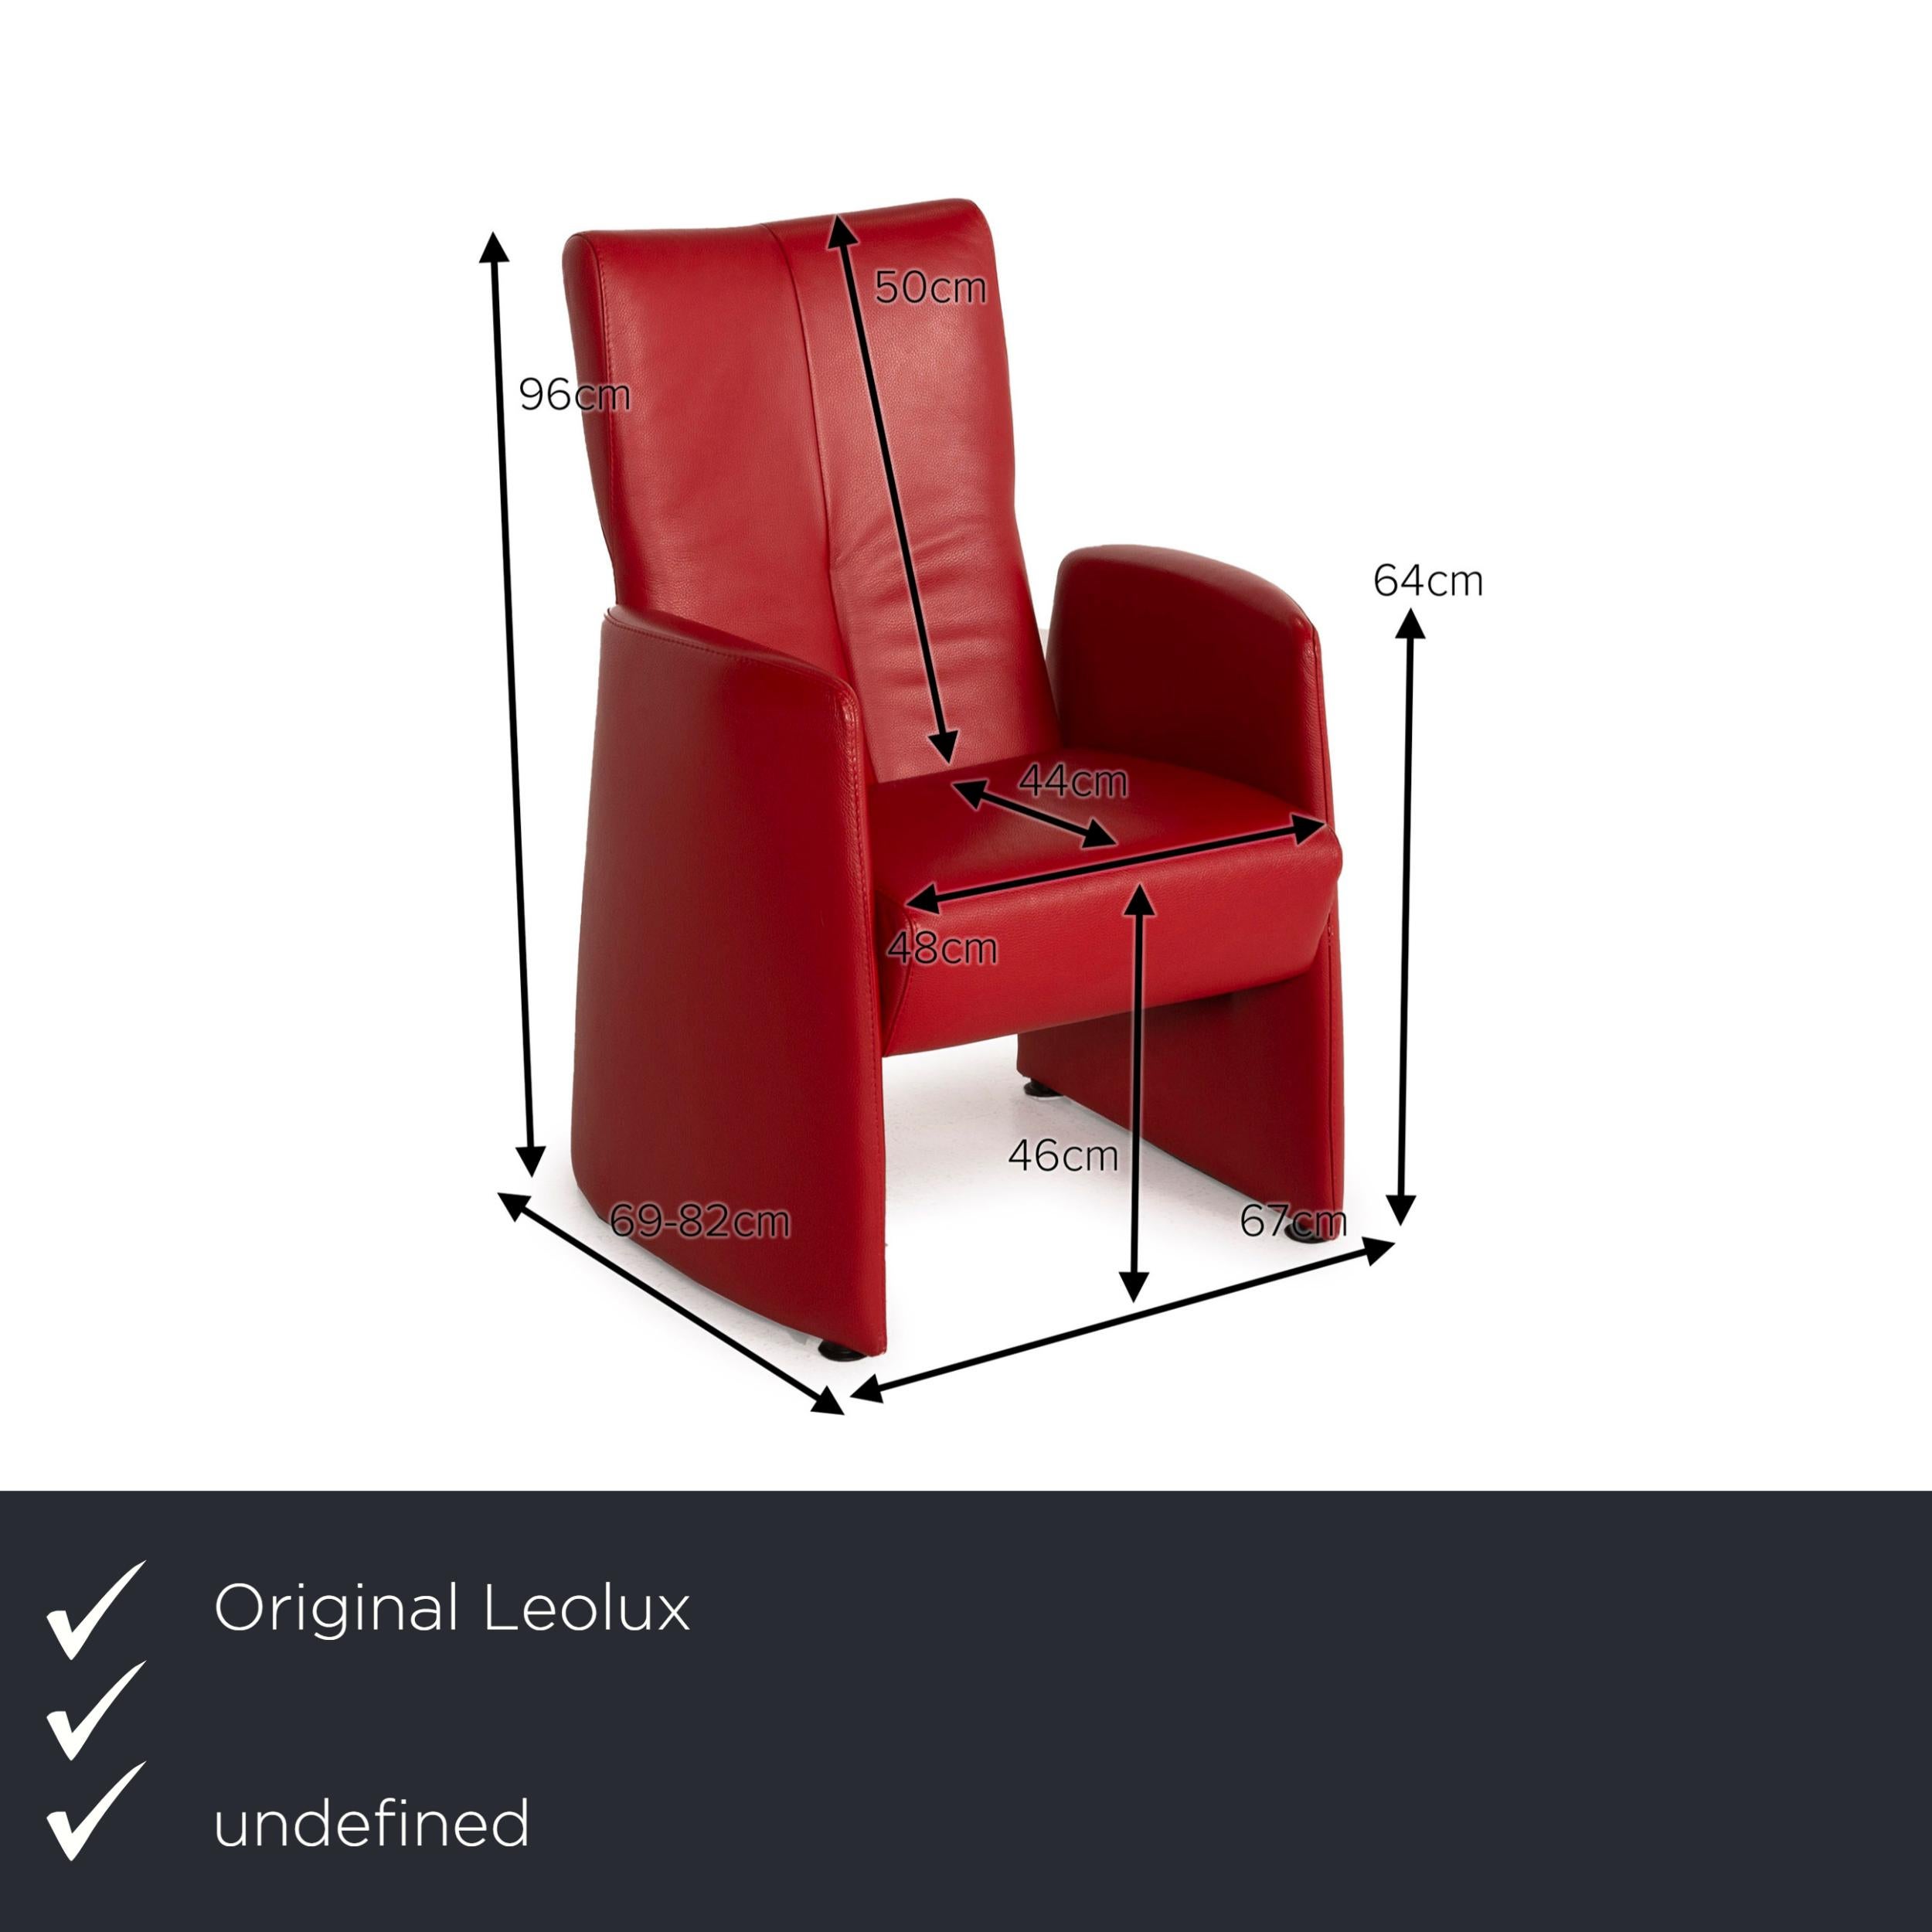 We present to you a Leolux leather armchair set red relax function set.
  
 

 Product measurements in centimeters:
 

 depth: 69
 width: 67
 height: 96
 seat height: 46
 rest height: 64
 seat depth: 44
 seat width: 48
 back height: